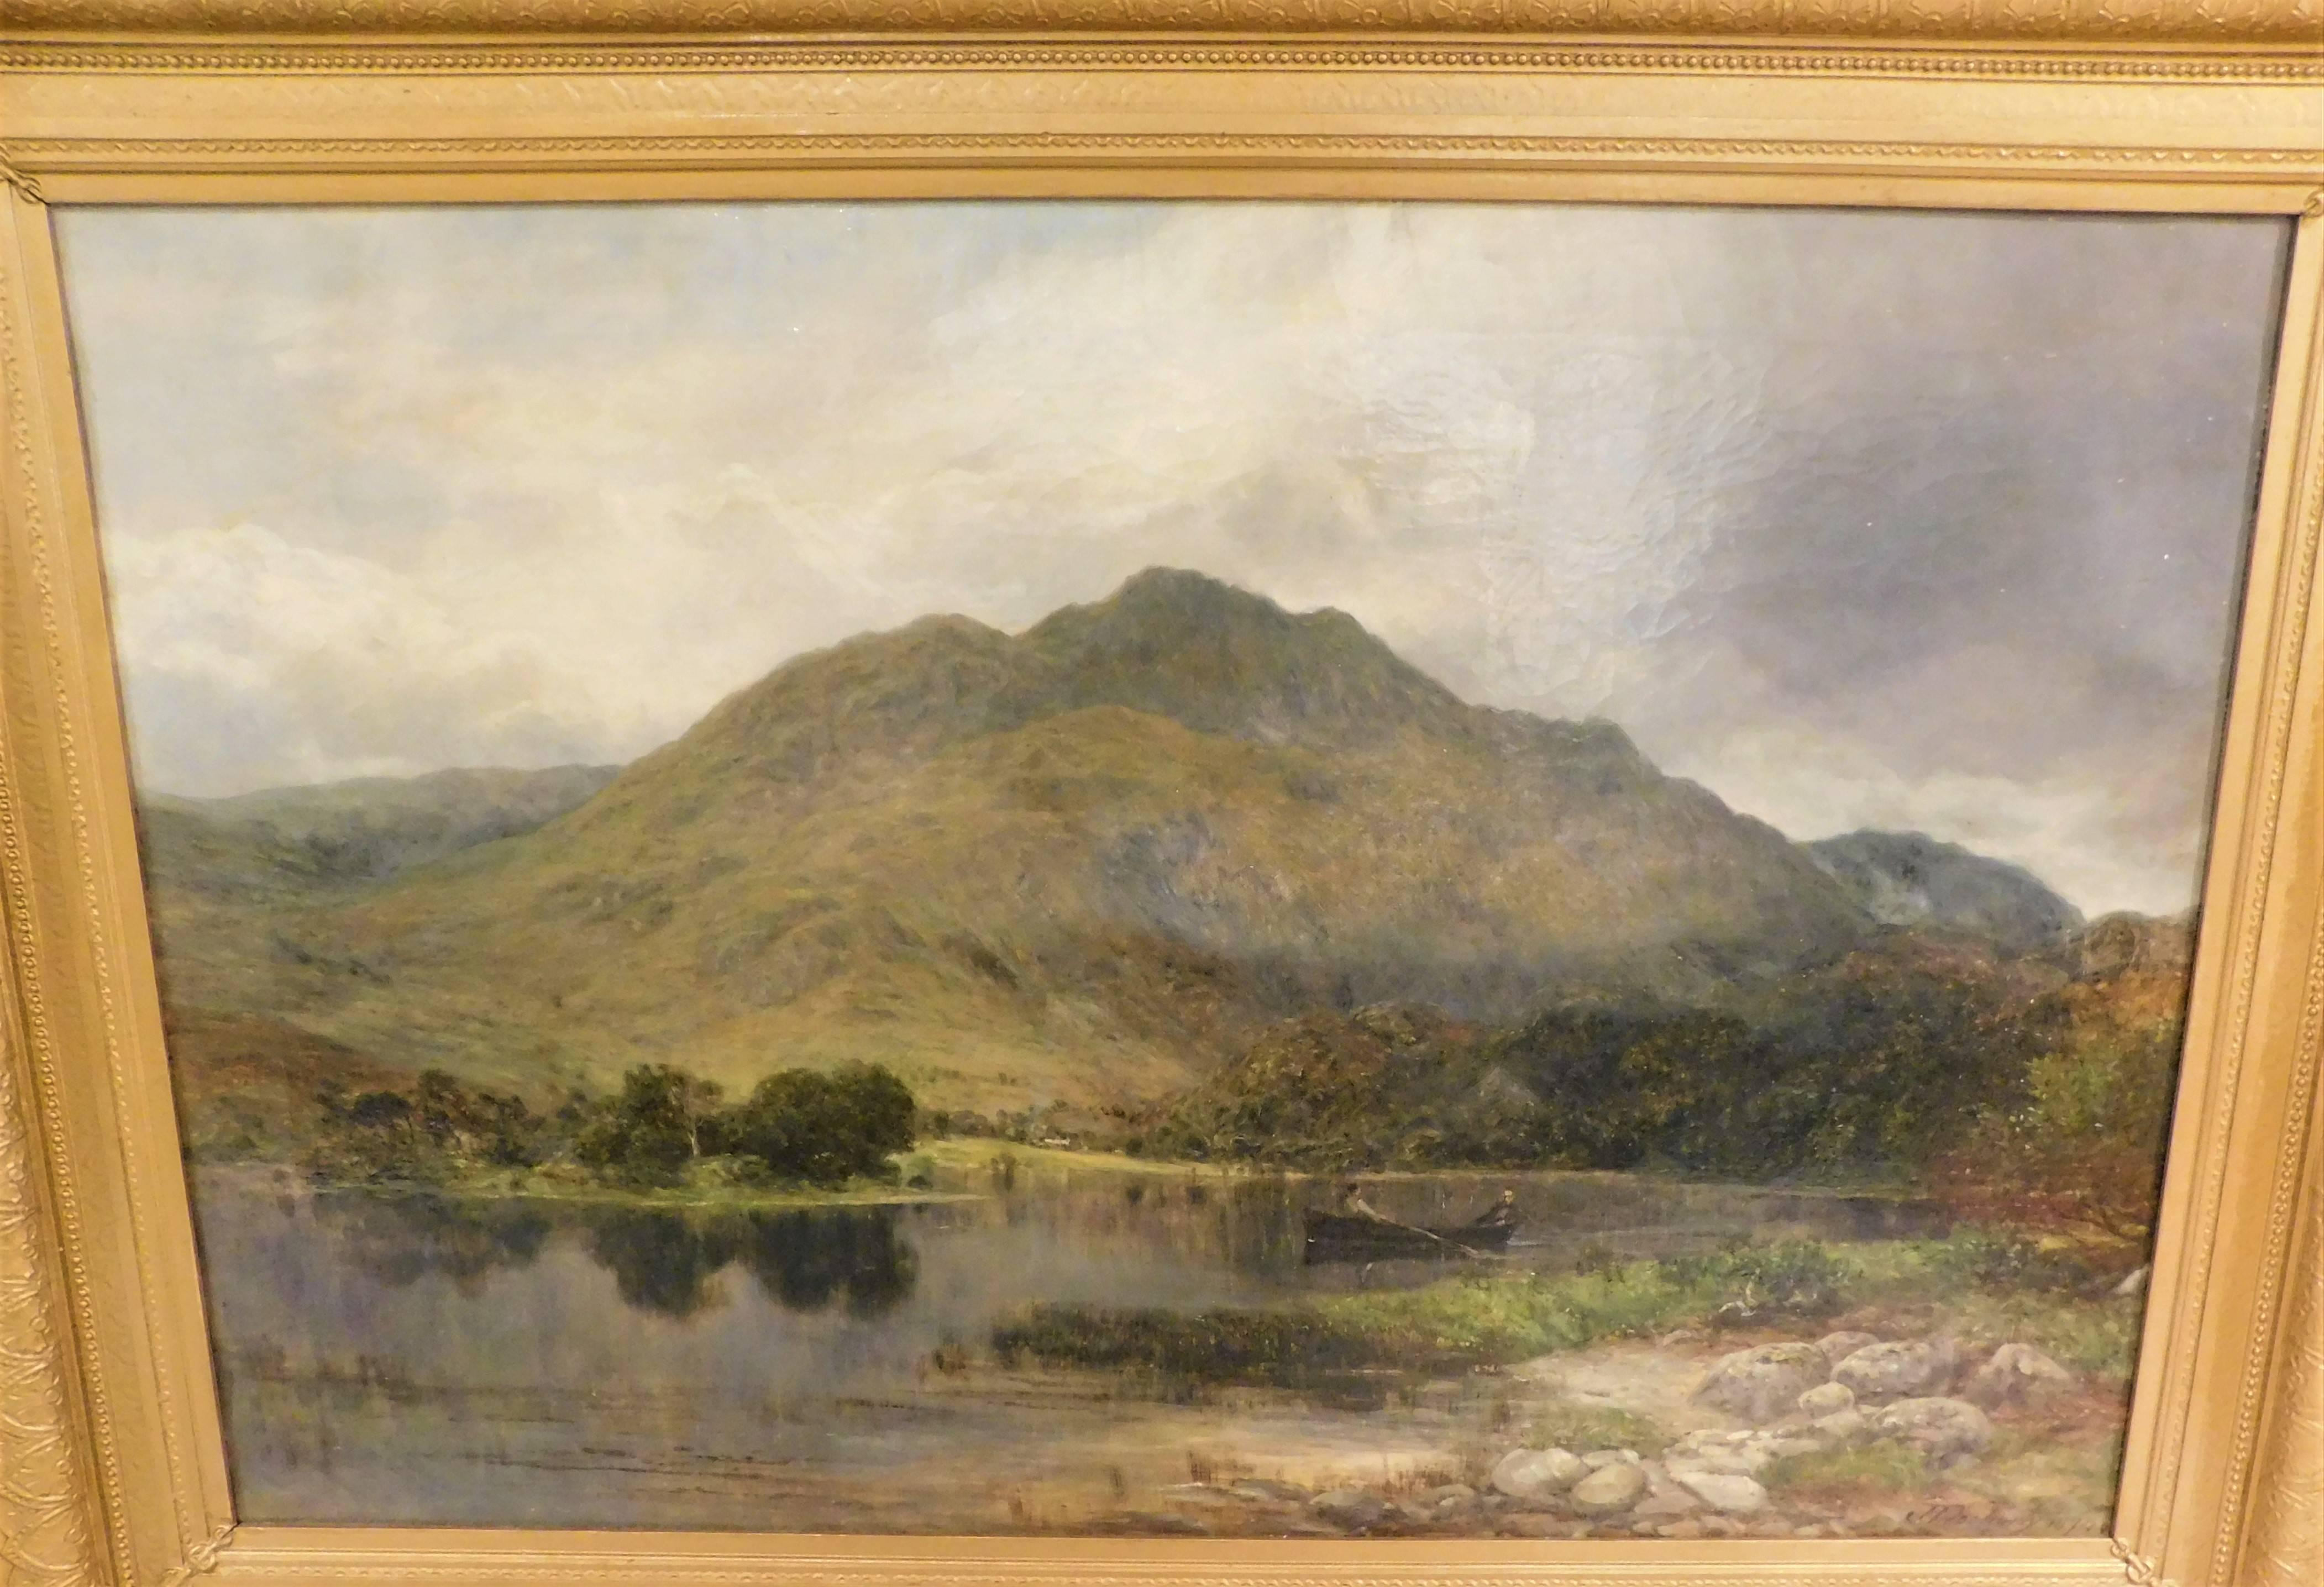 James Docharty Original Oil on Canvas 1874 Landscape Painting In Good Condition For Sale In Hamilton, Ontario